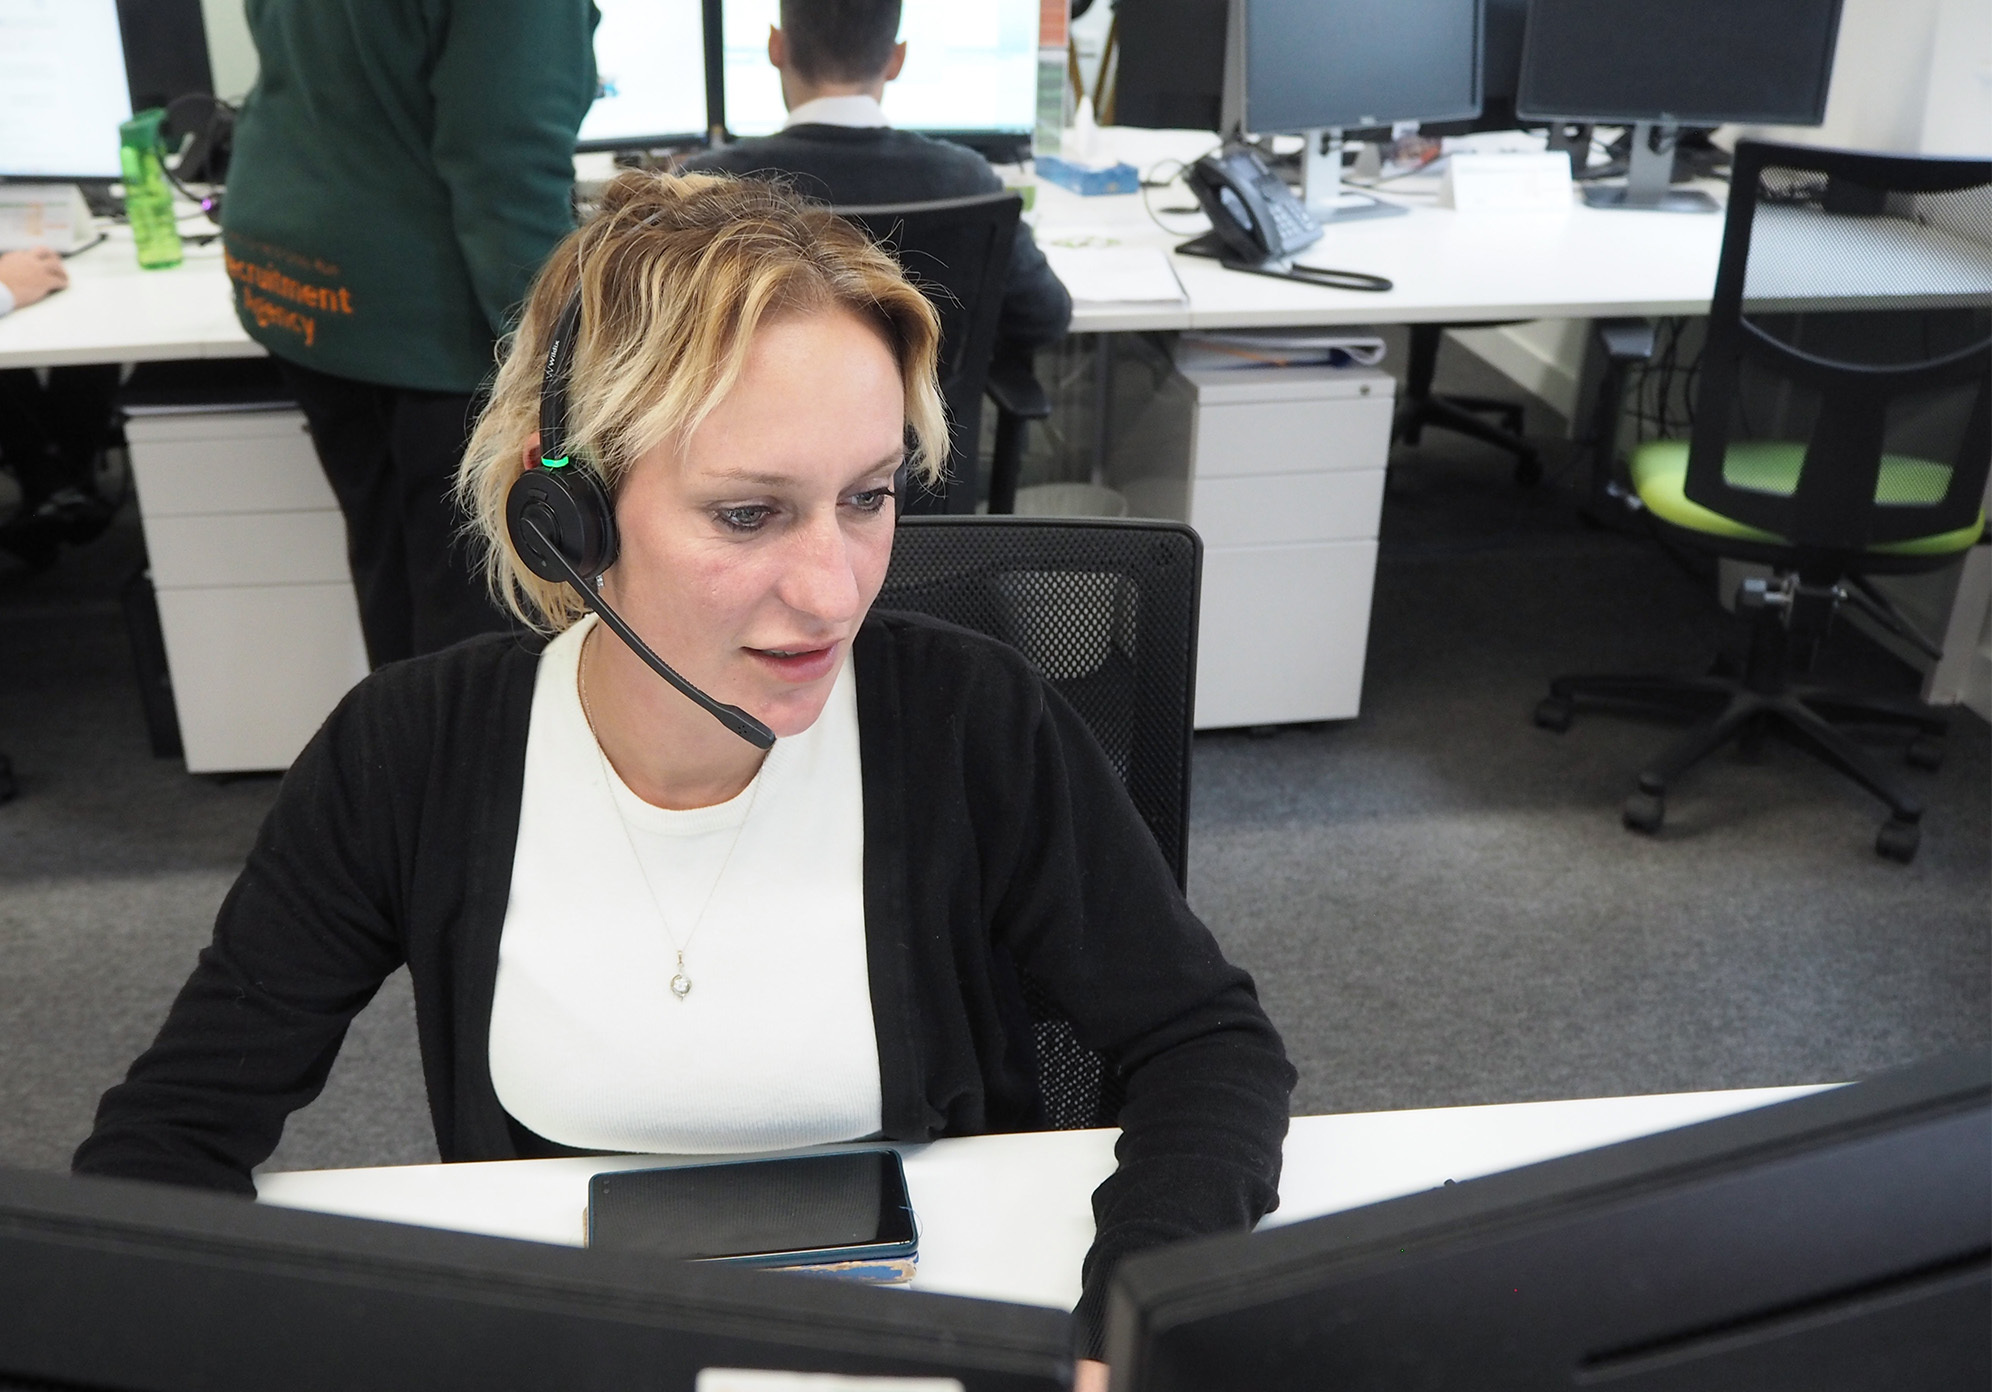 Nikita is wearing a headset whilst speaking to a client and looking at two computer monitors in front of her.